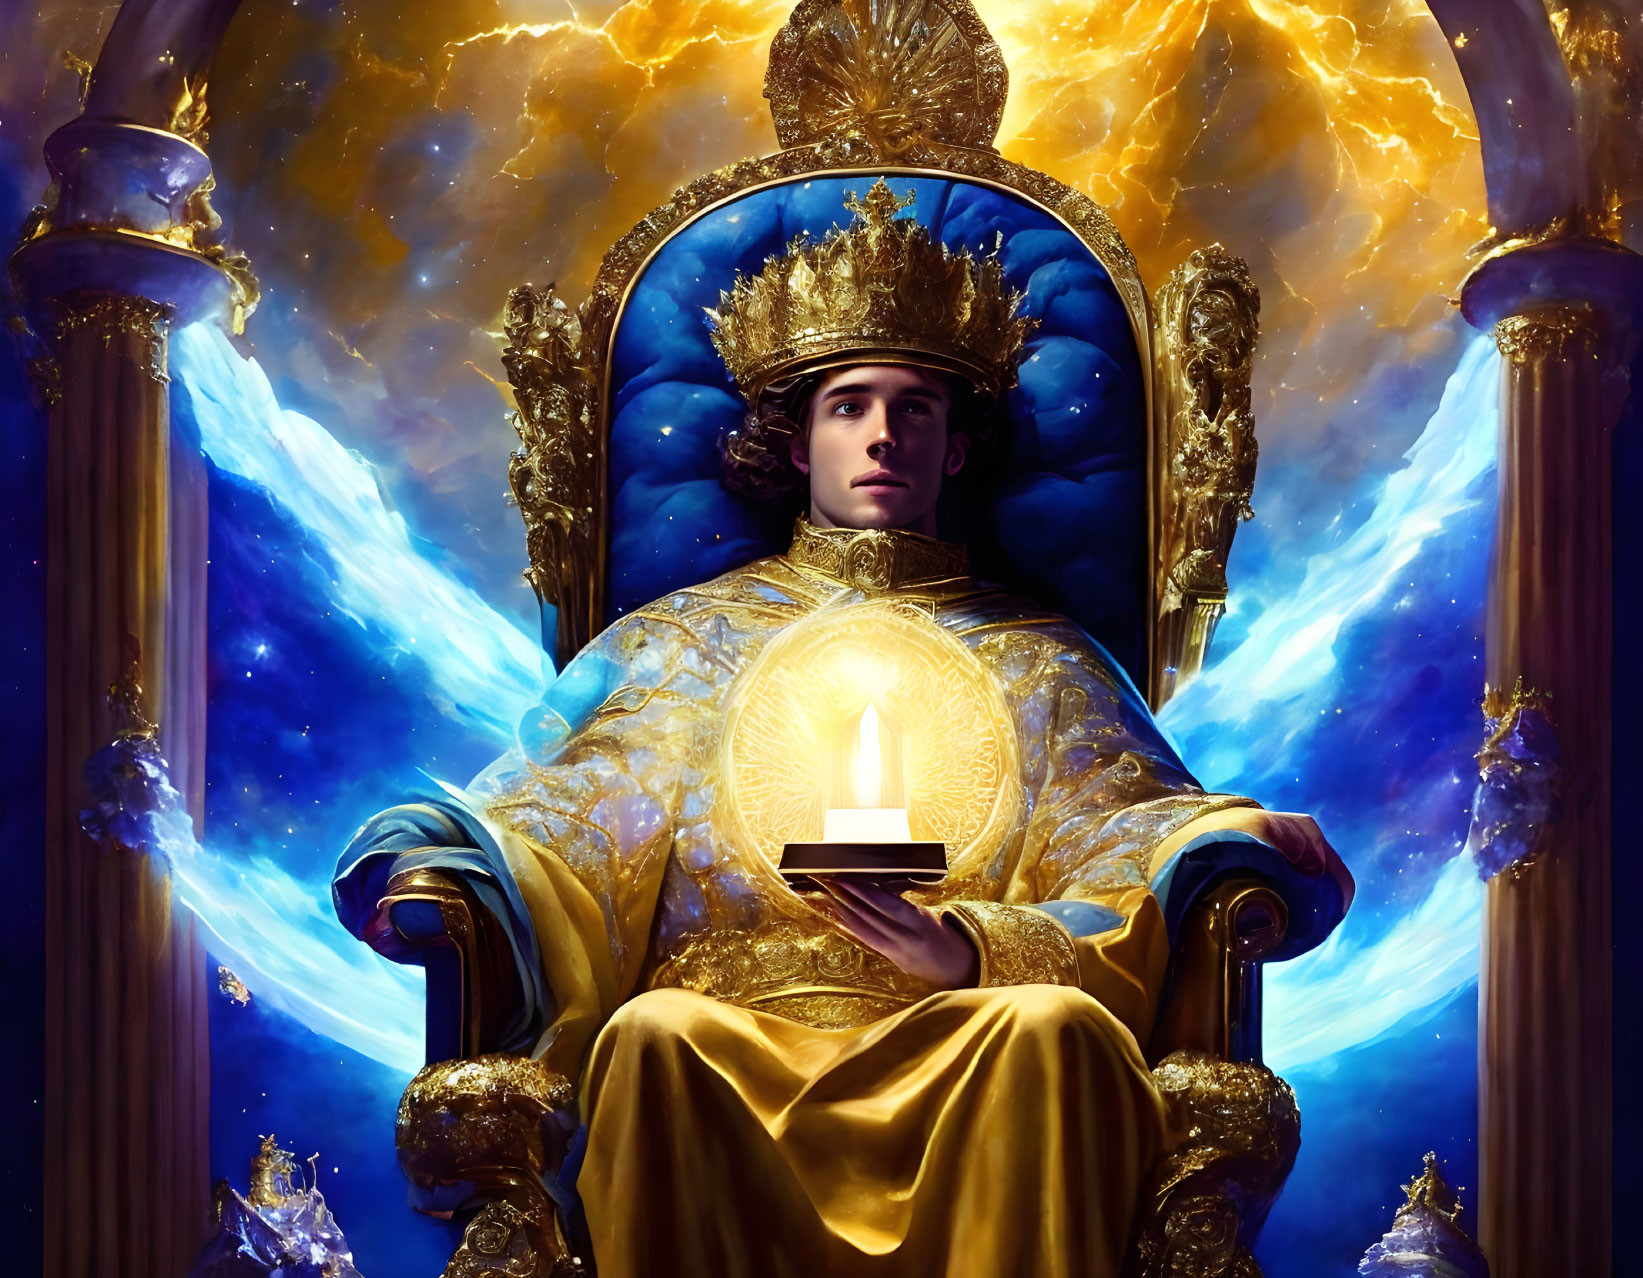 Royal Figure in Blue and Gold Robes on Throne with Candle, Pillars, Cosmic Background